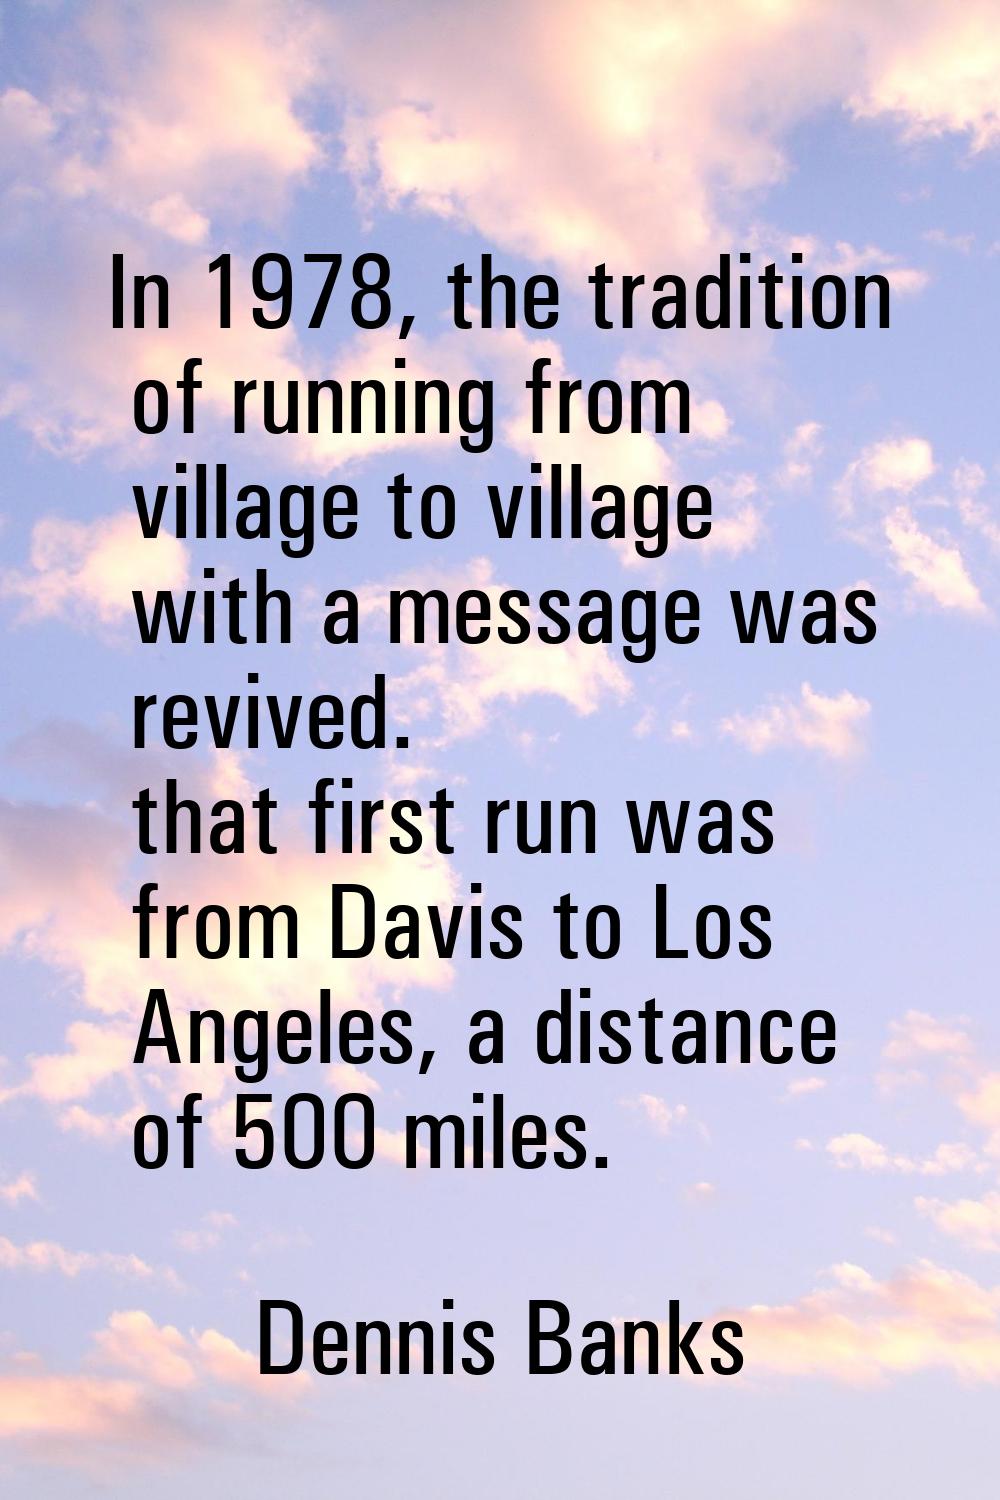 In 1978, the tradition of running from village to village with a message was revived. that first ru